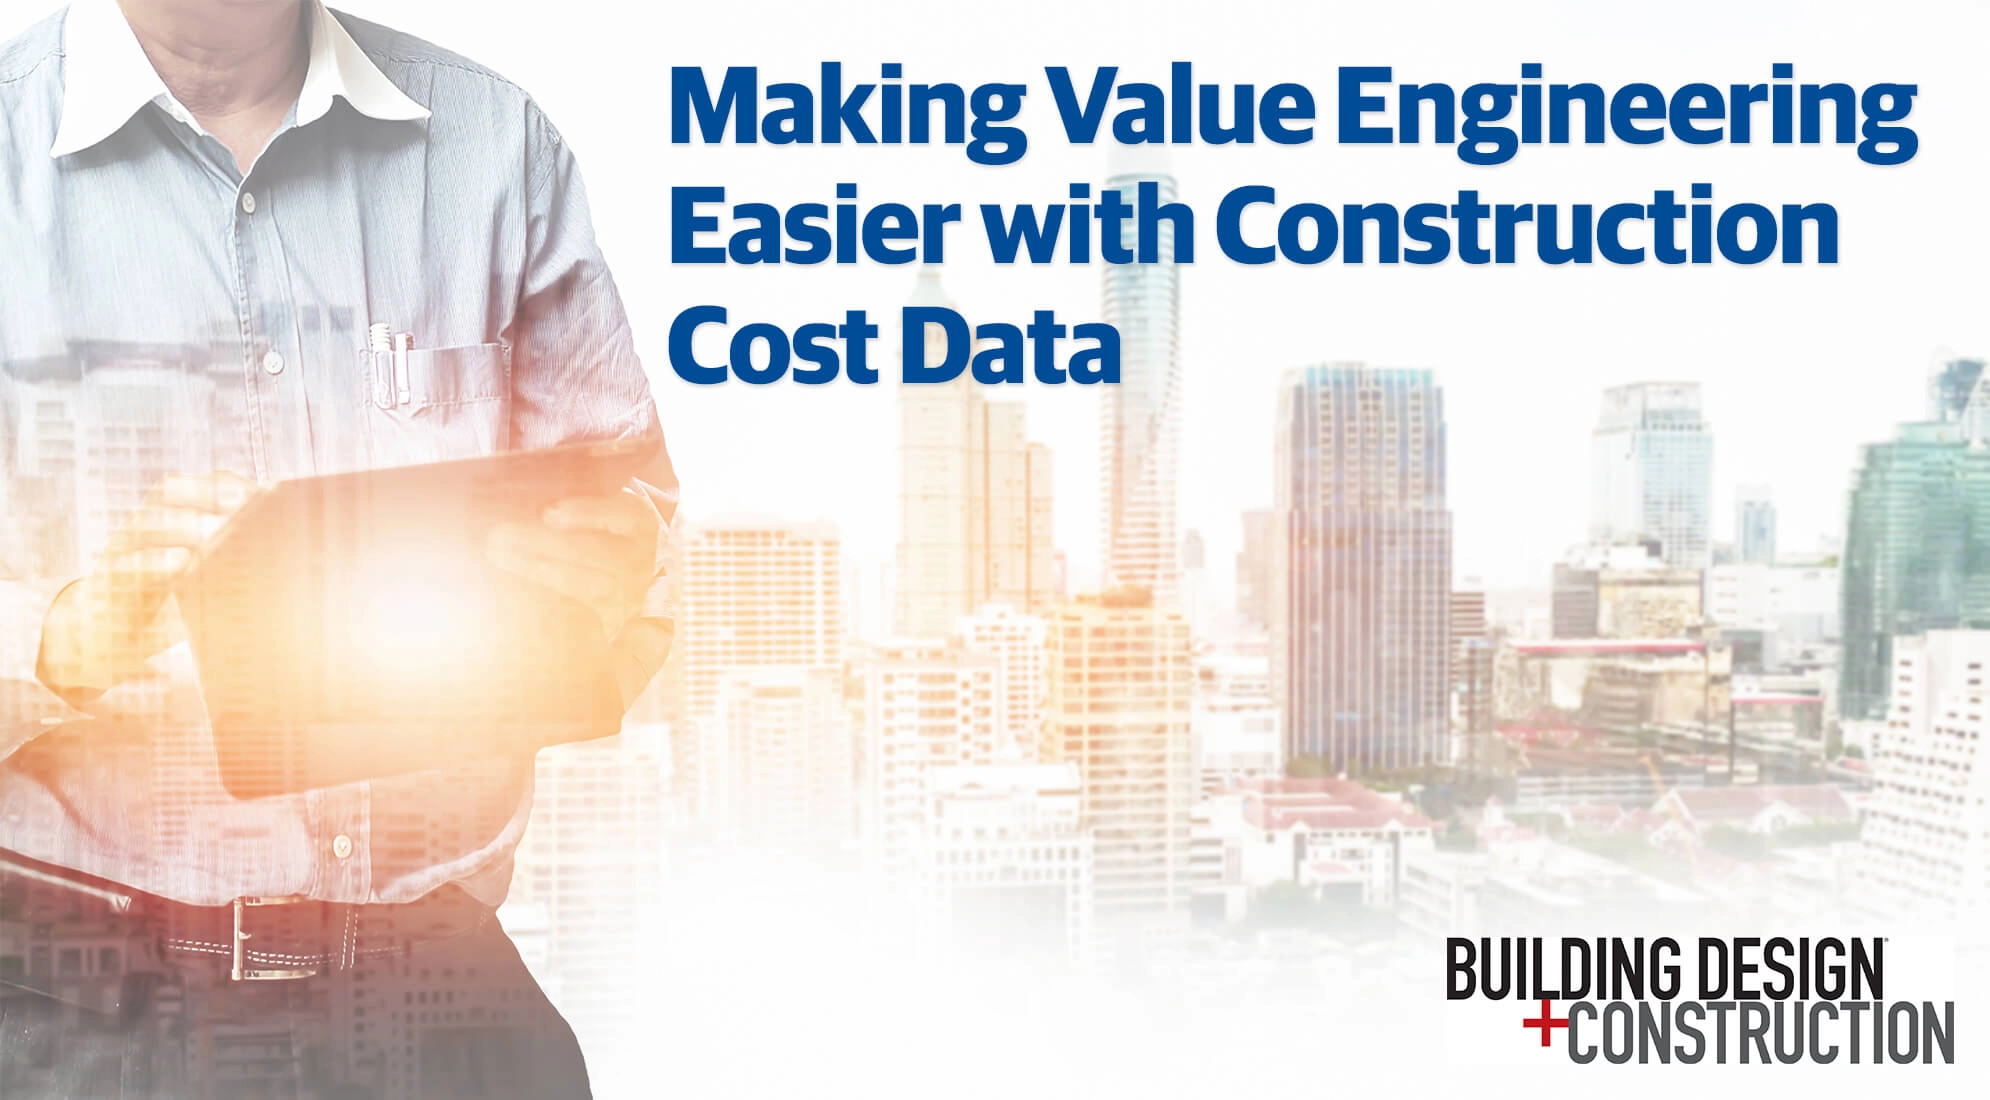 Making Value Engineering Easier with Construction Cost Data 2